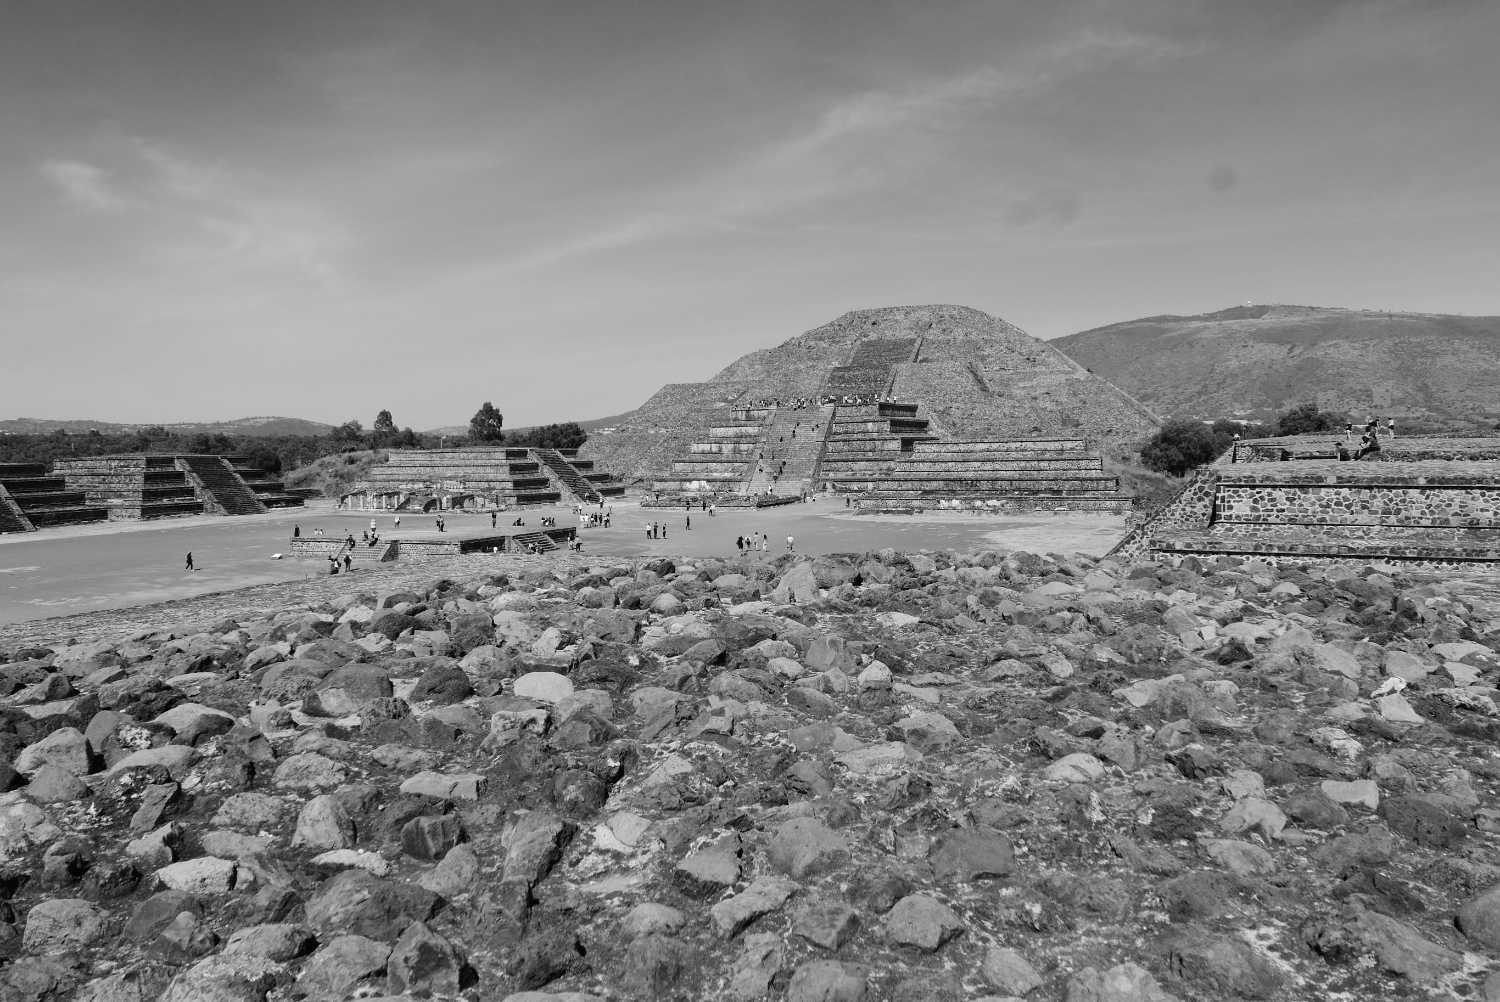 Overview of square in front of Pyramid of the Moon in Teotihuacan